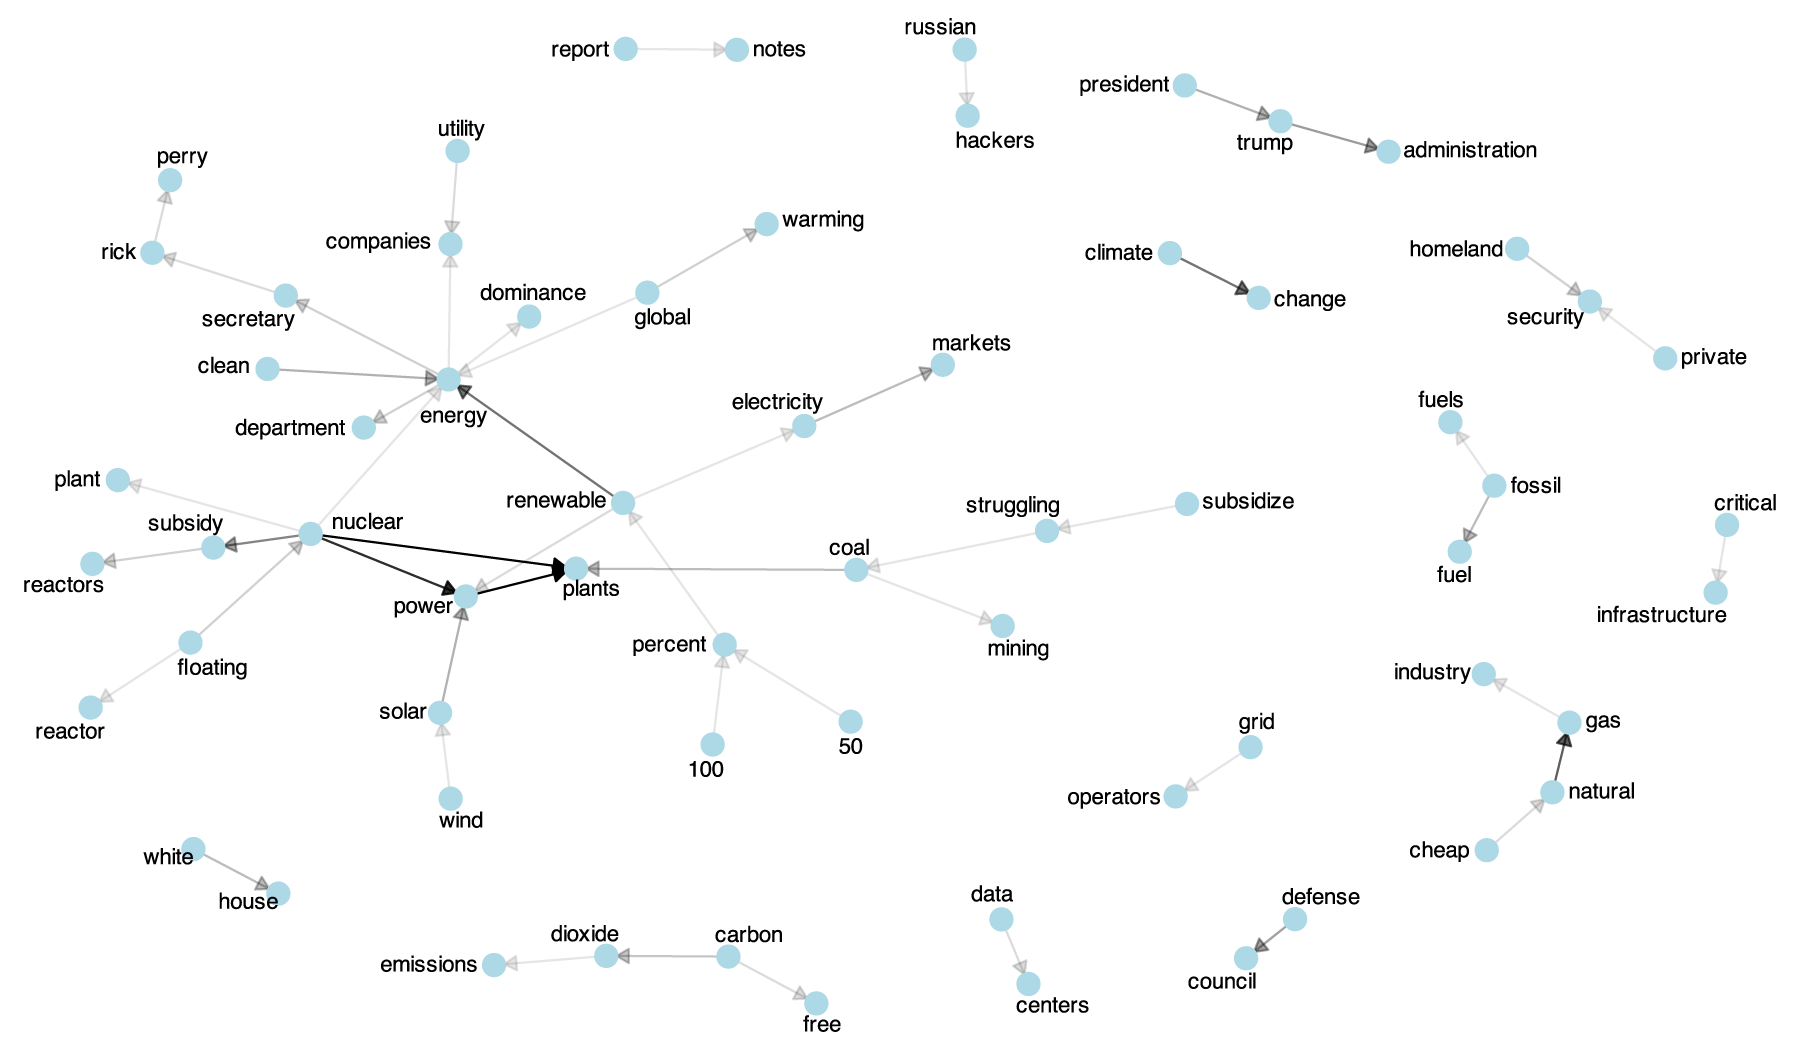 Network map of topics discussed in the news media in 2018